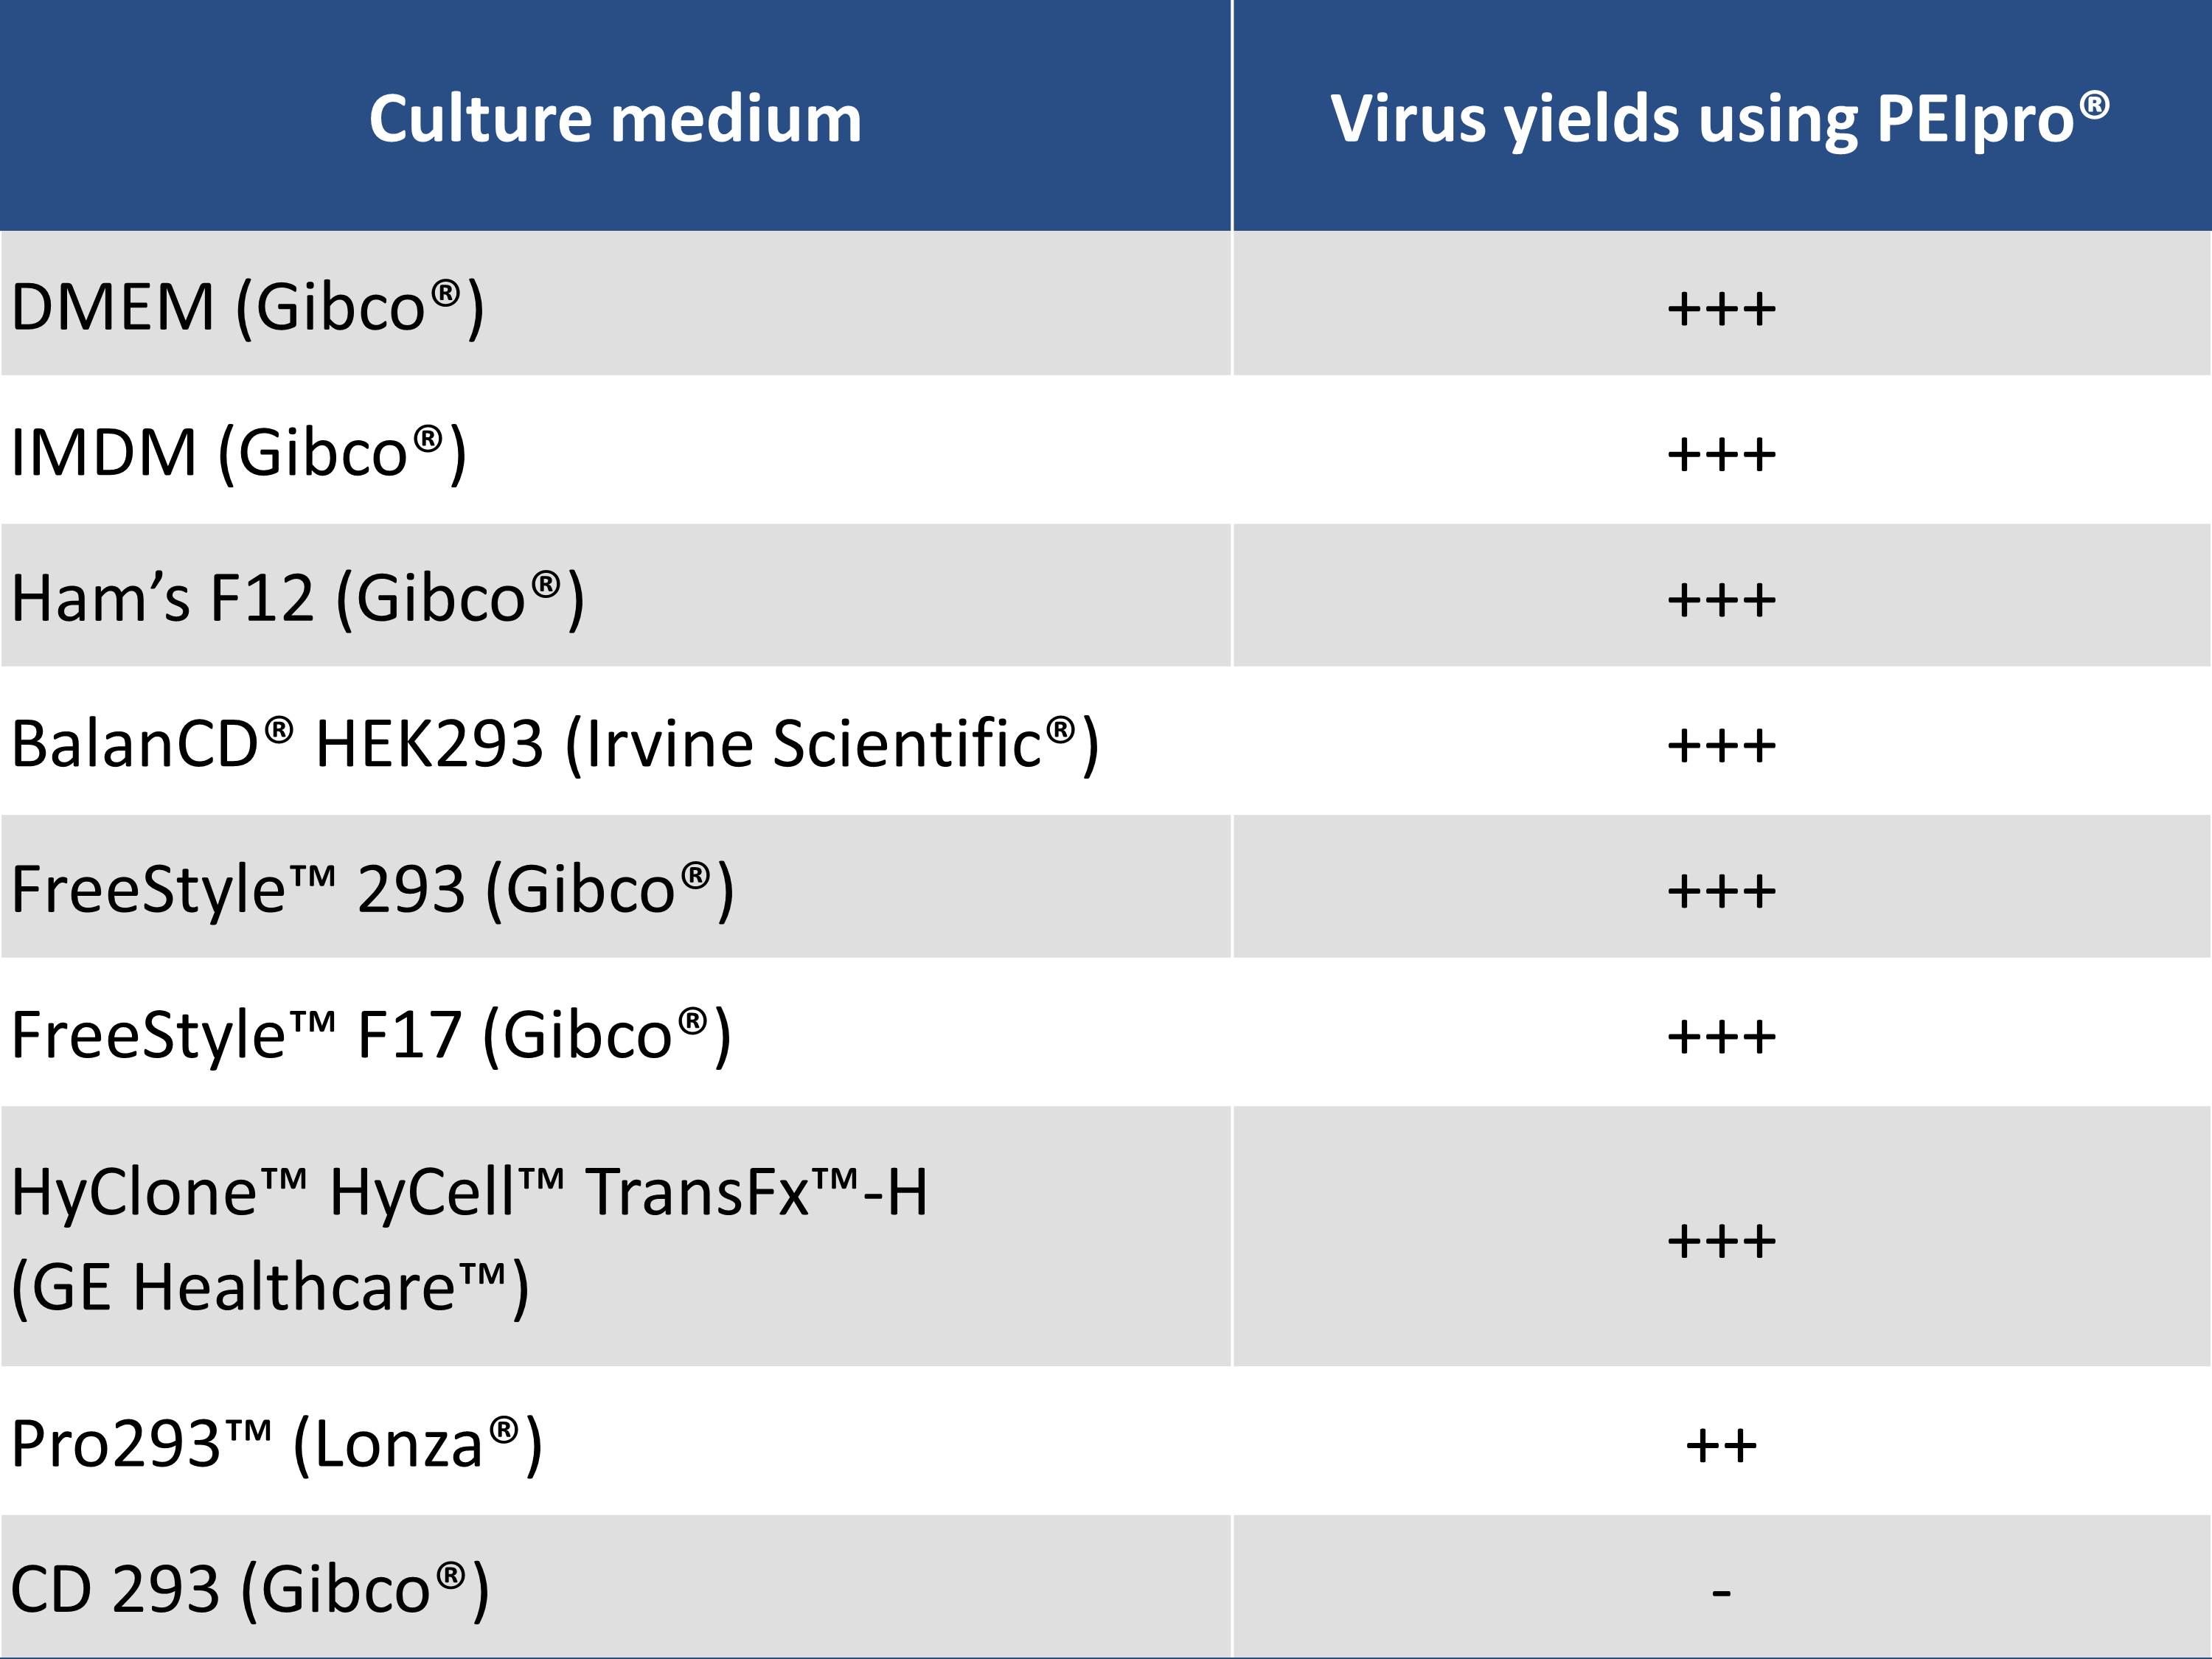 PEI - Virus yields compared with different culture media